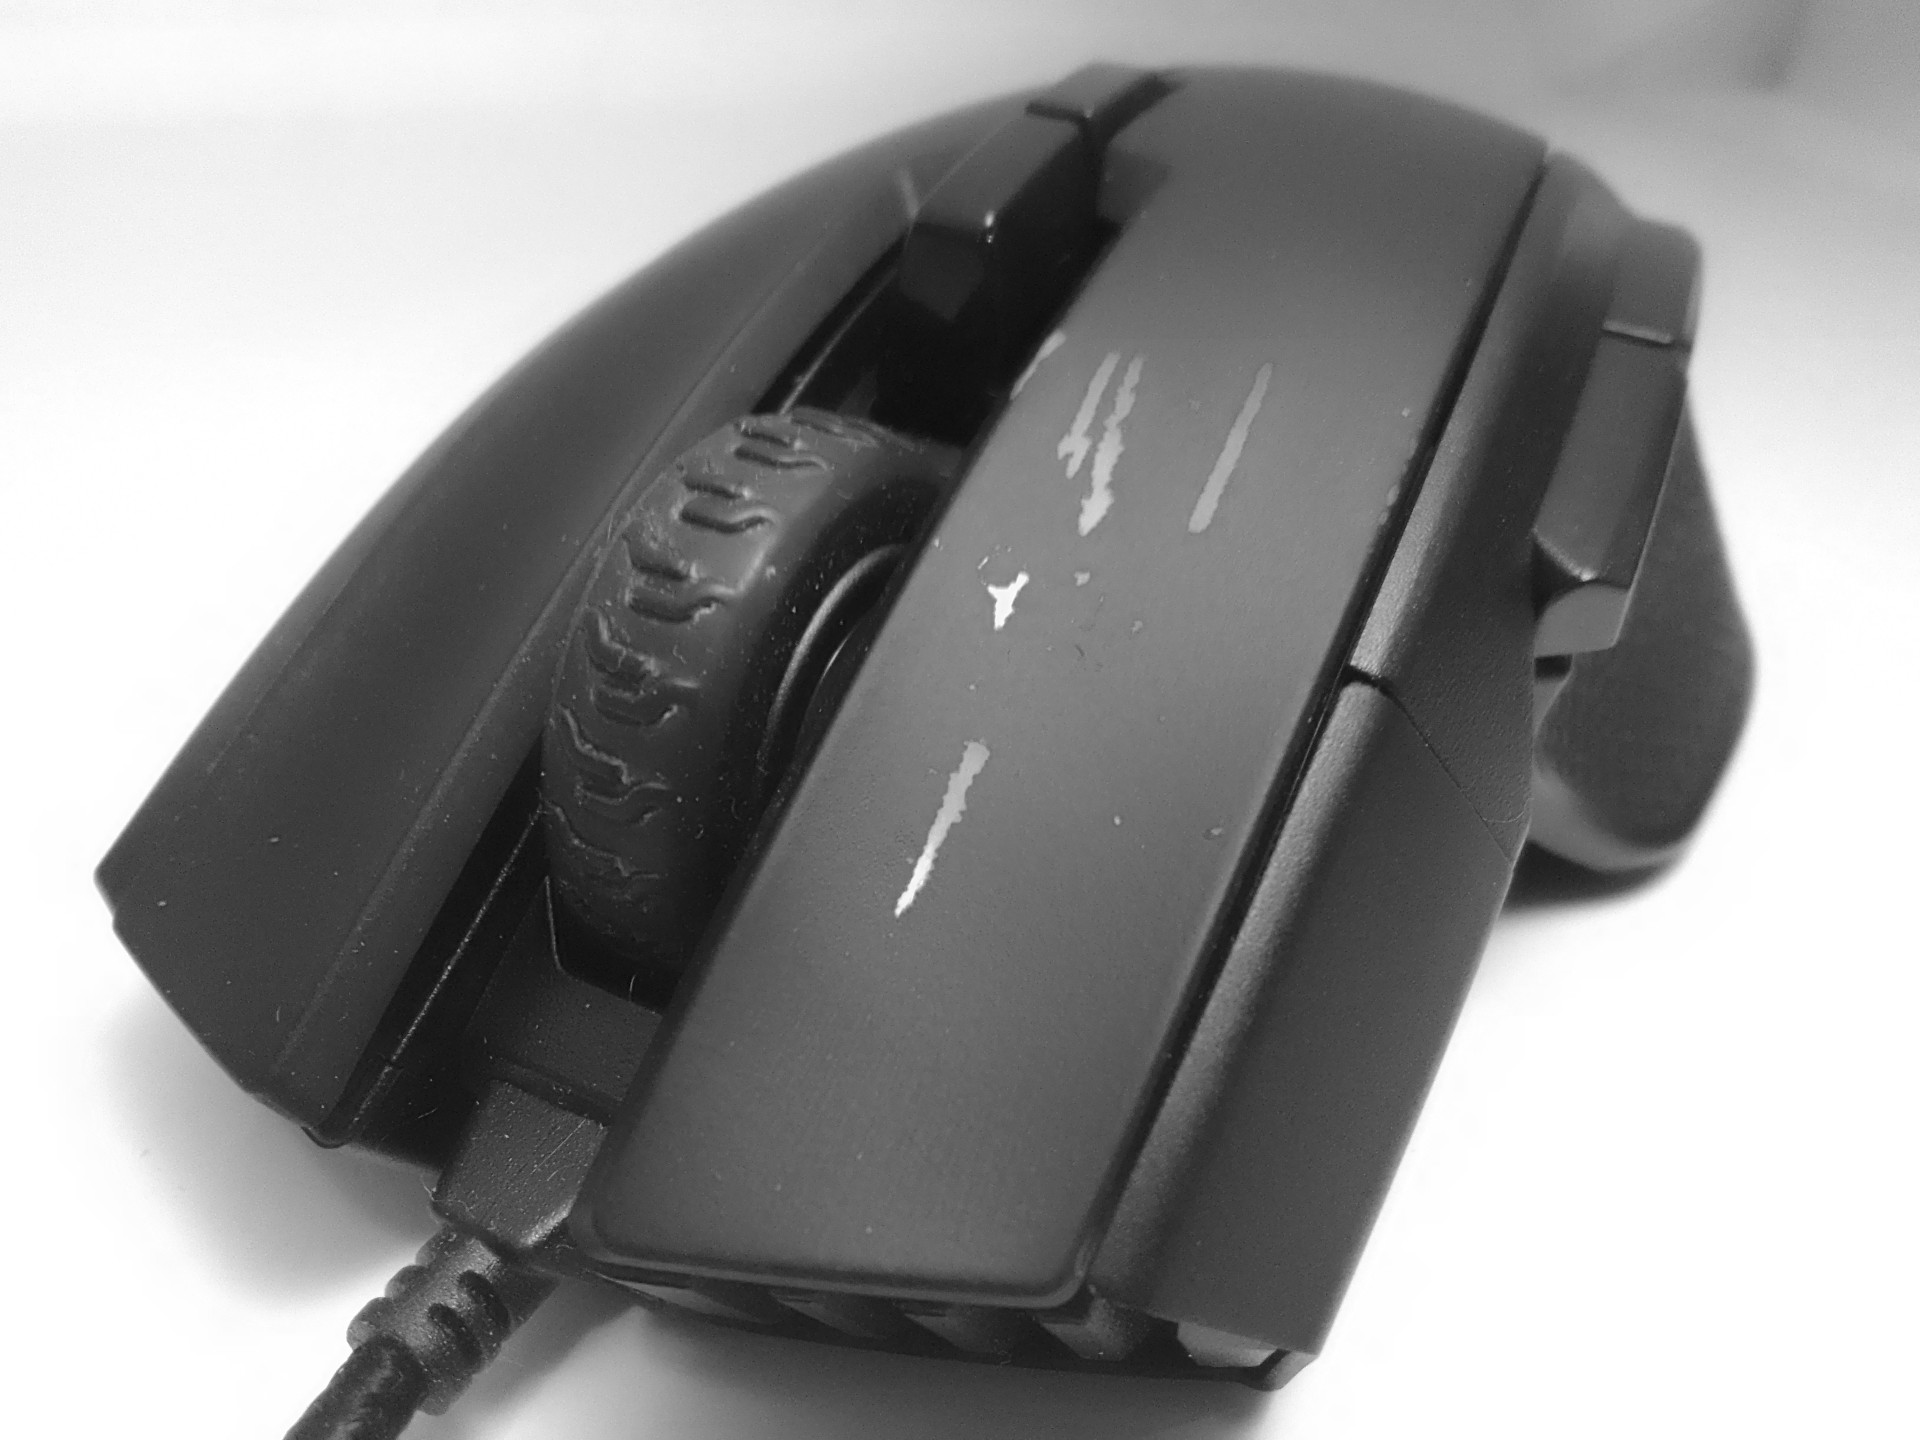 picture of Corsair ironclaw mouse with surface peeling